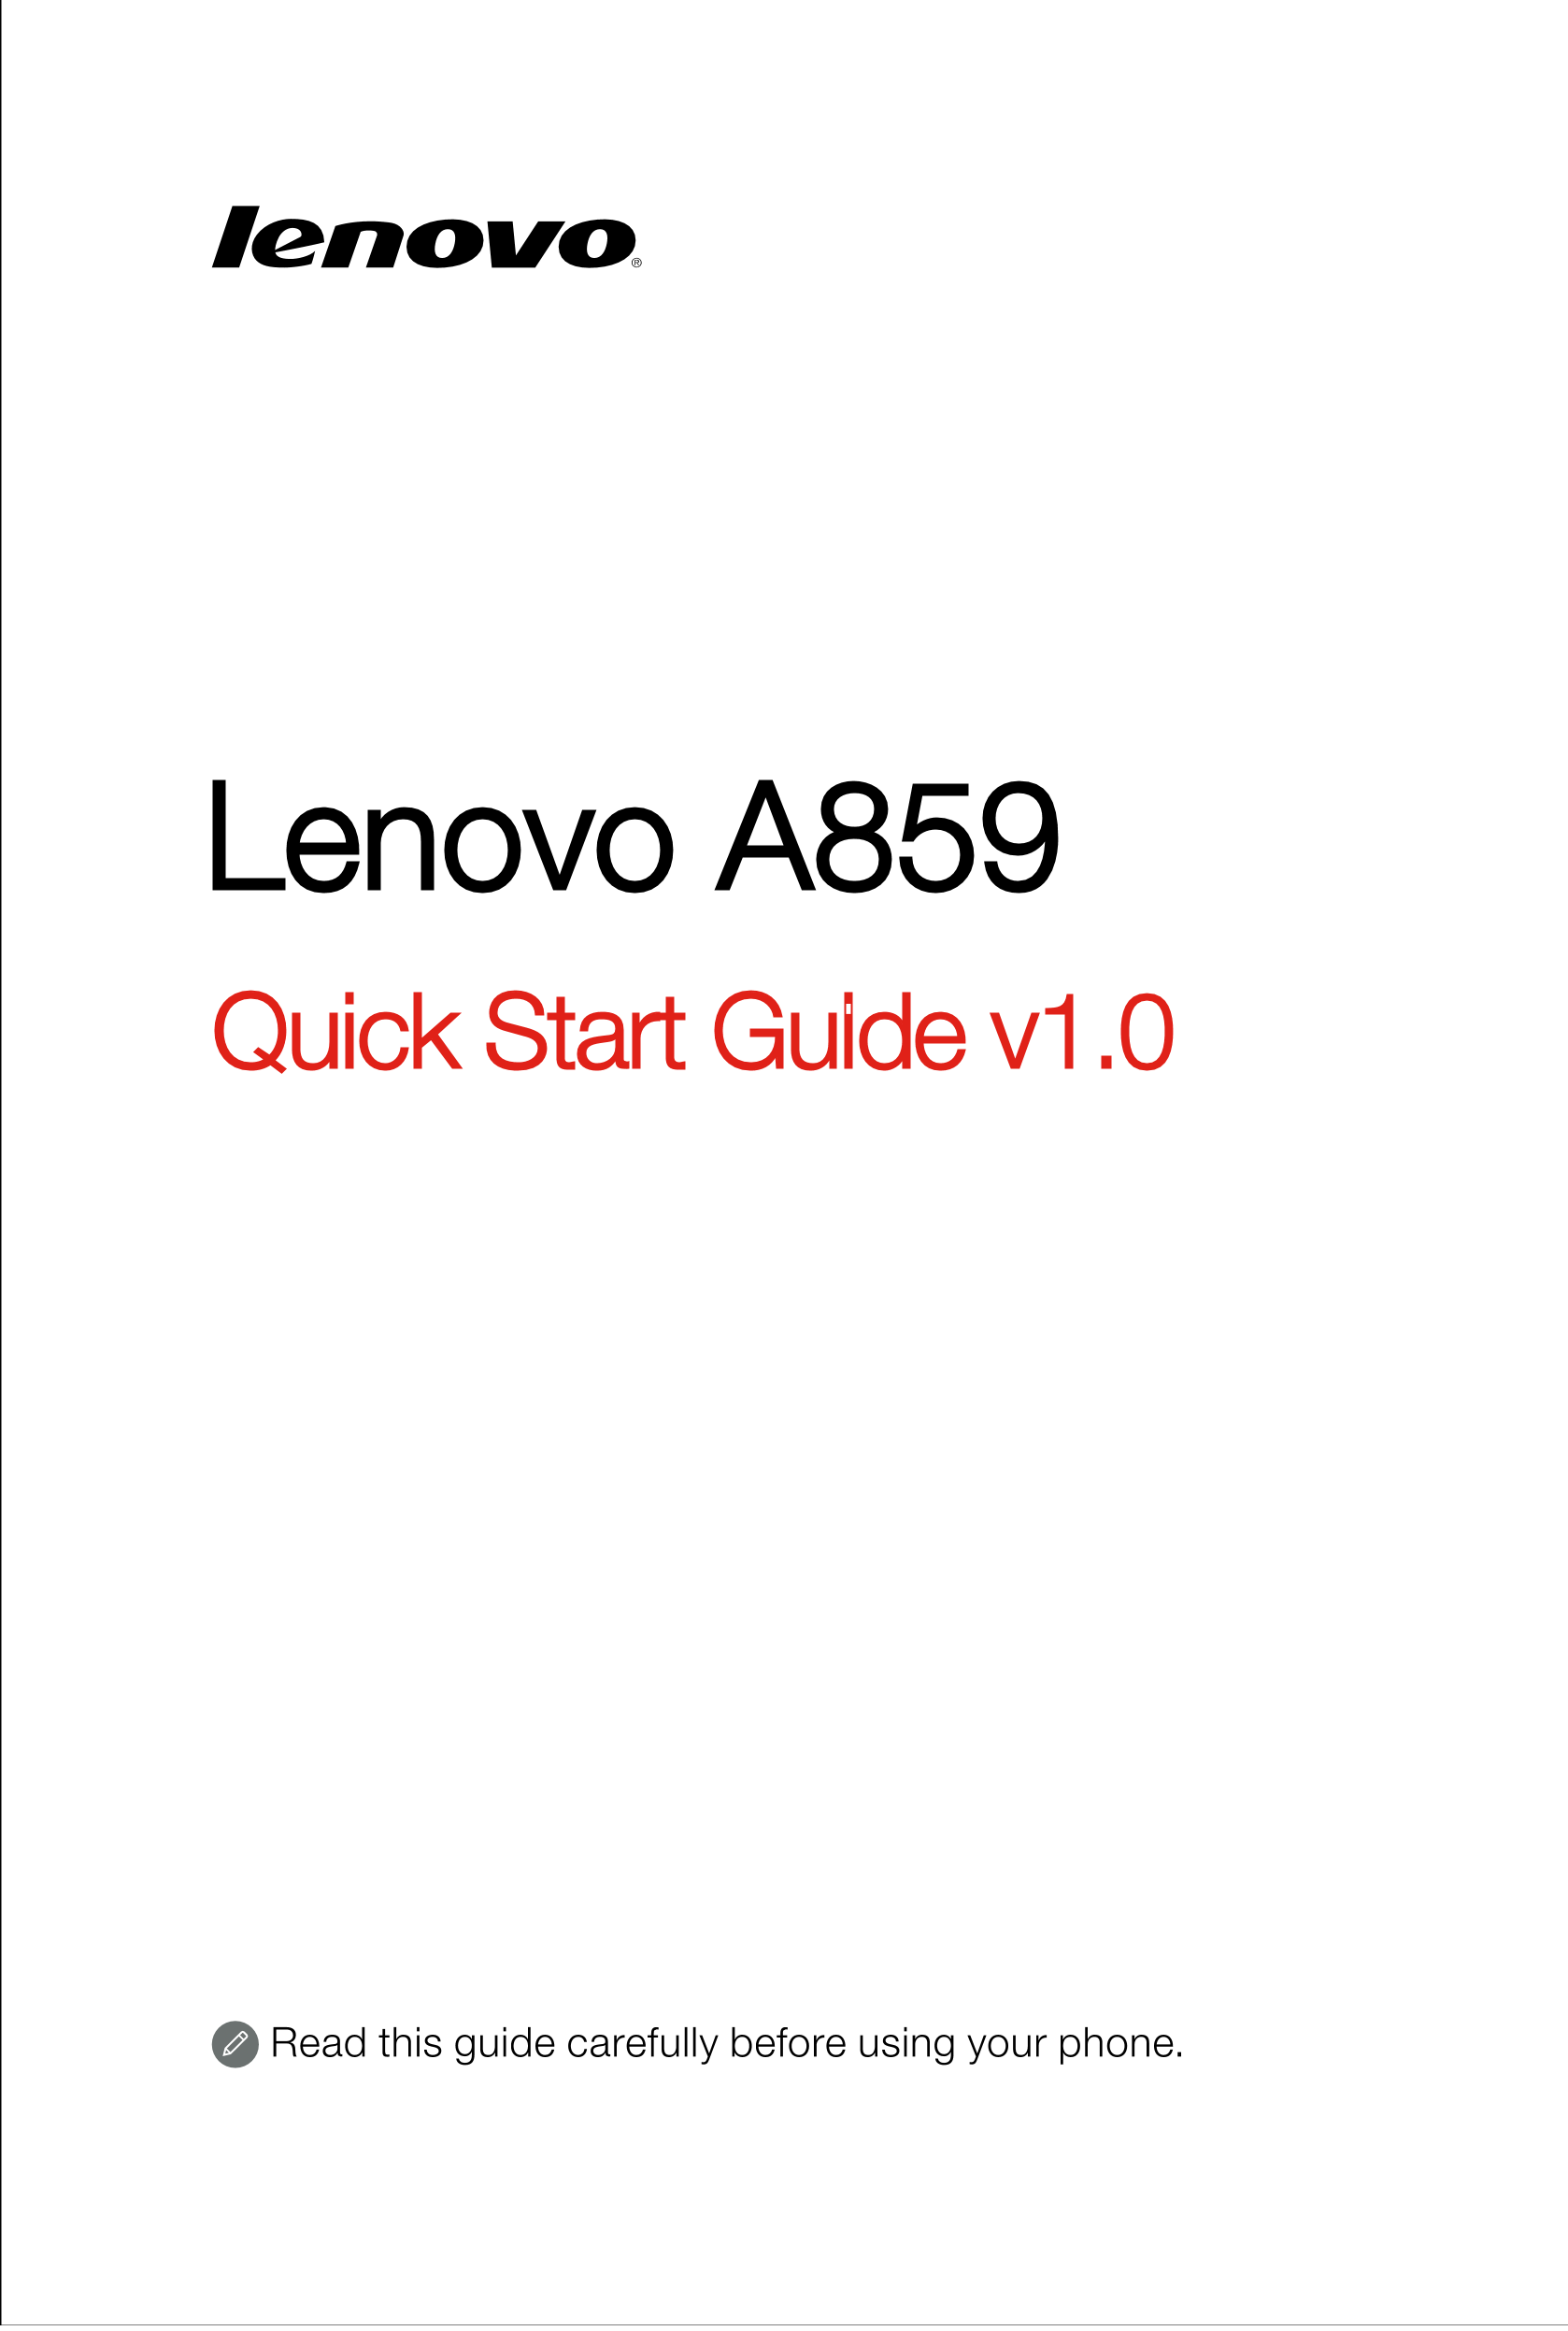 Lenovo A859
Quick Start Guide v1.0
Read this guide carefully before using your phone. 